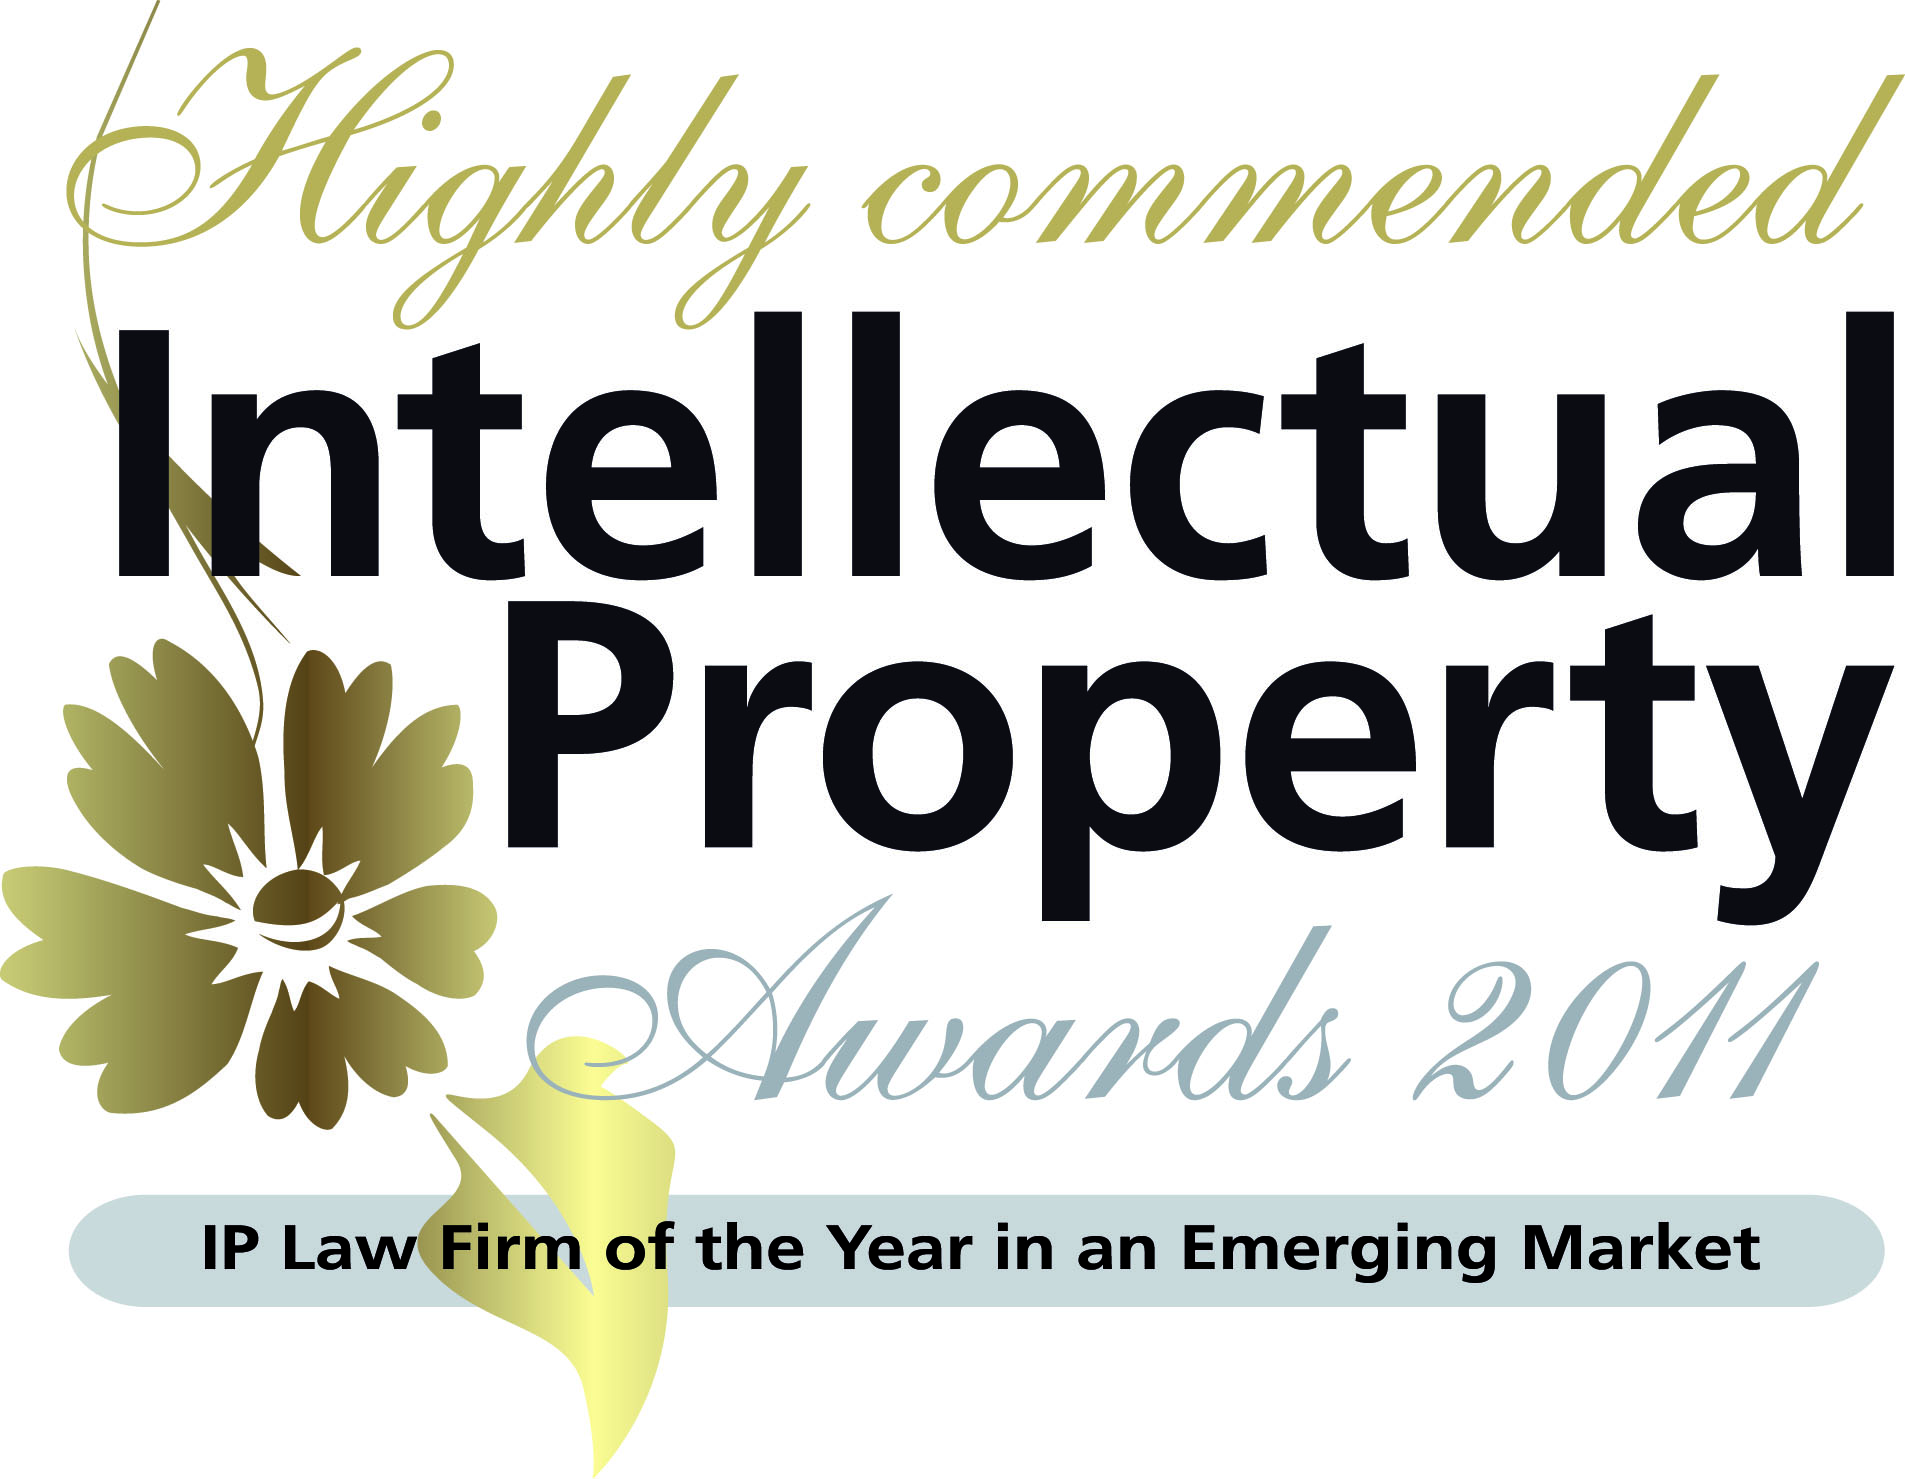 Highly Commended IP Law firm of the Year in an Emerging Market (Intellectual Property Awards 2011)